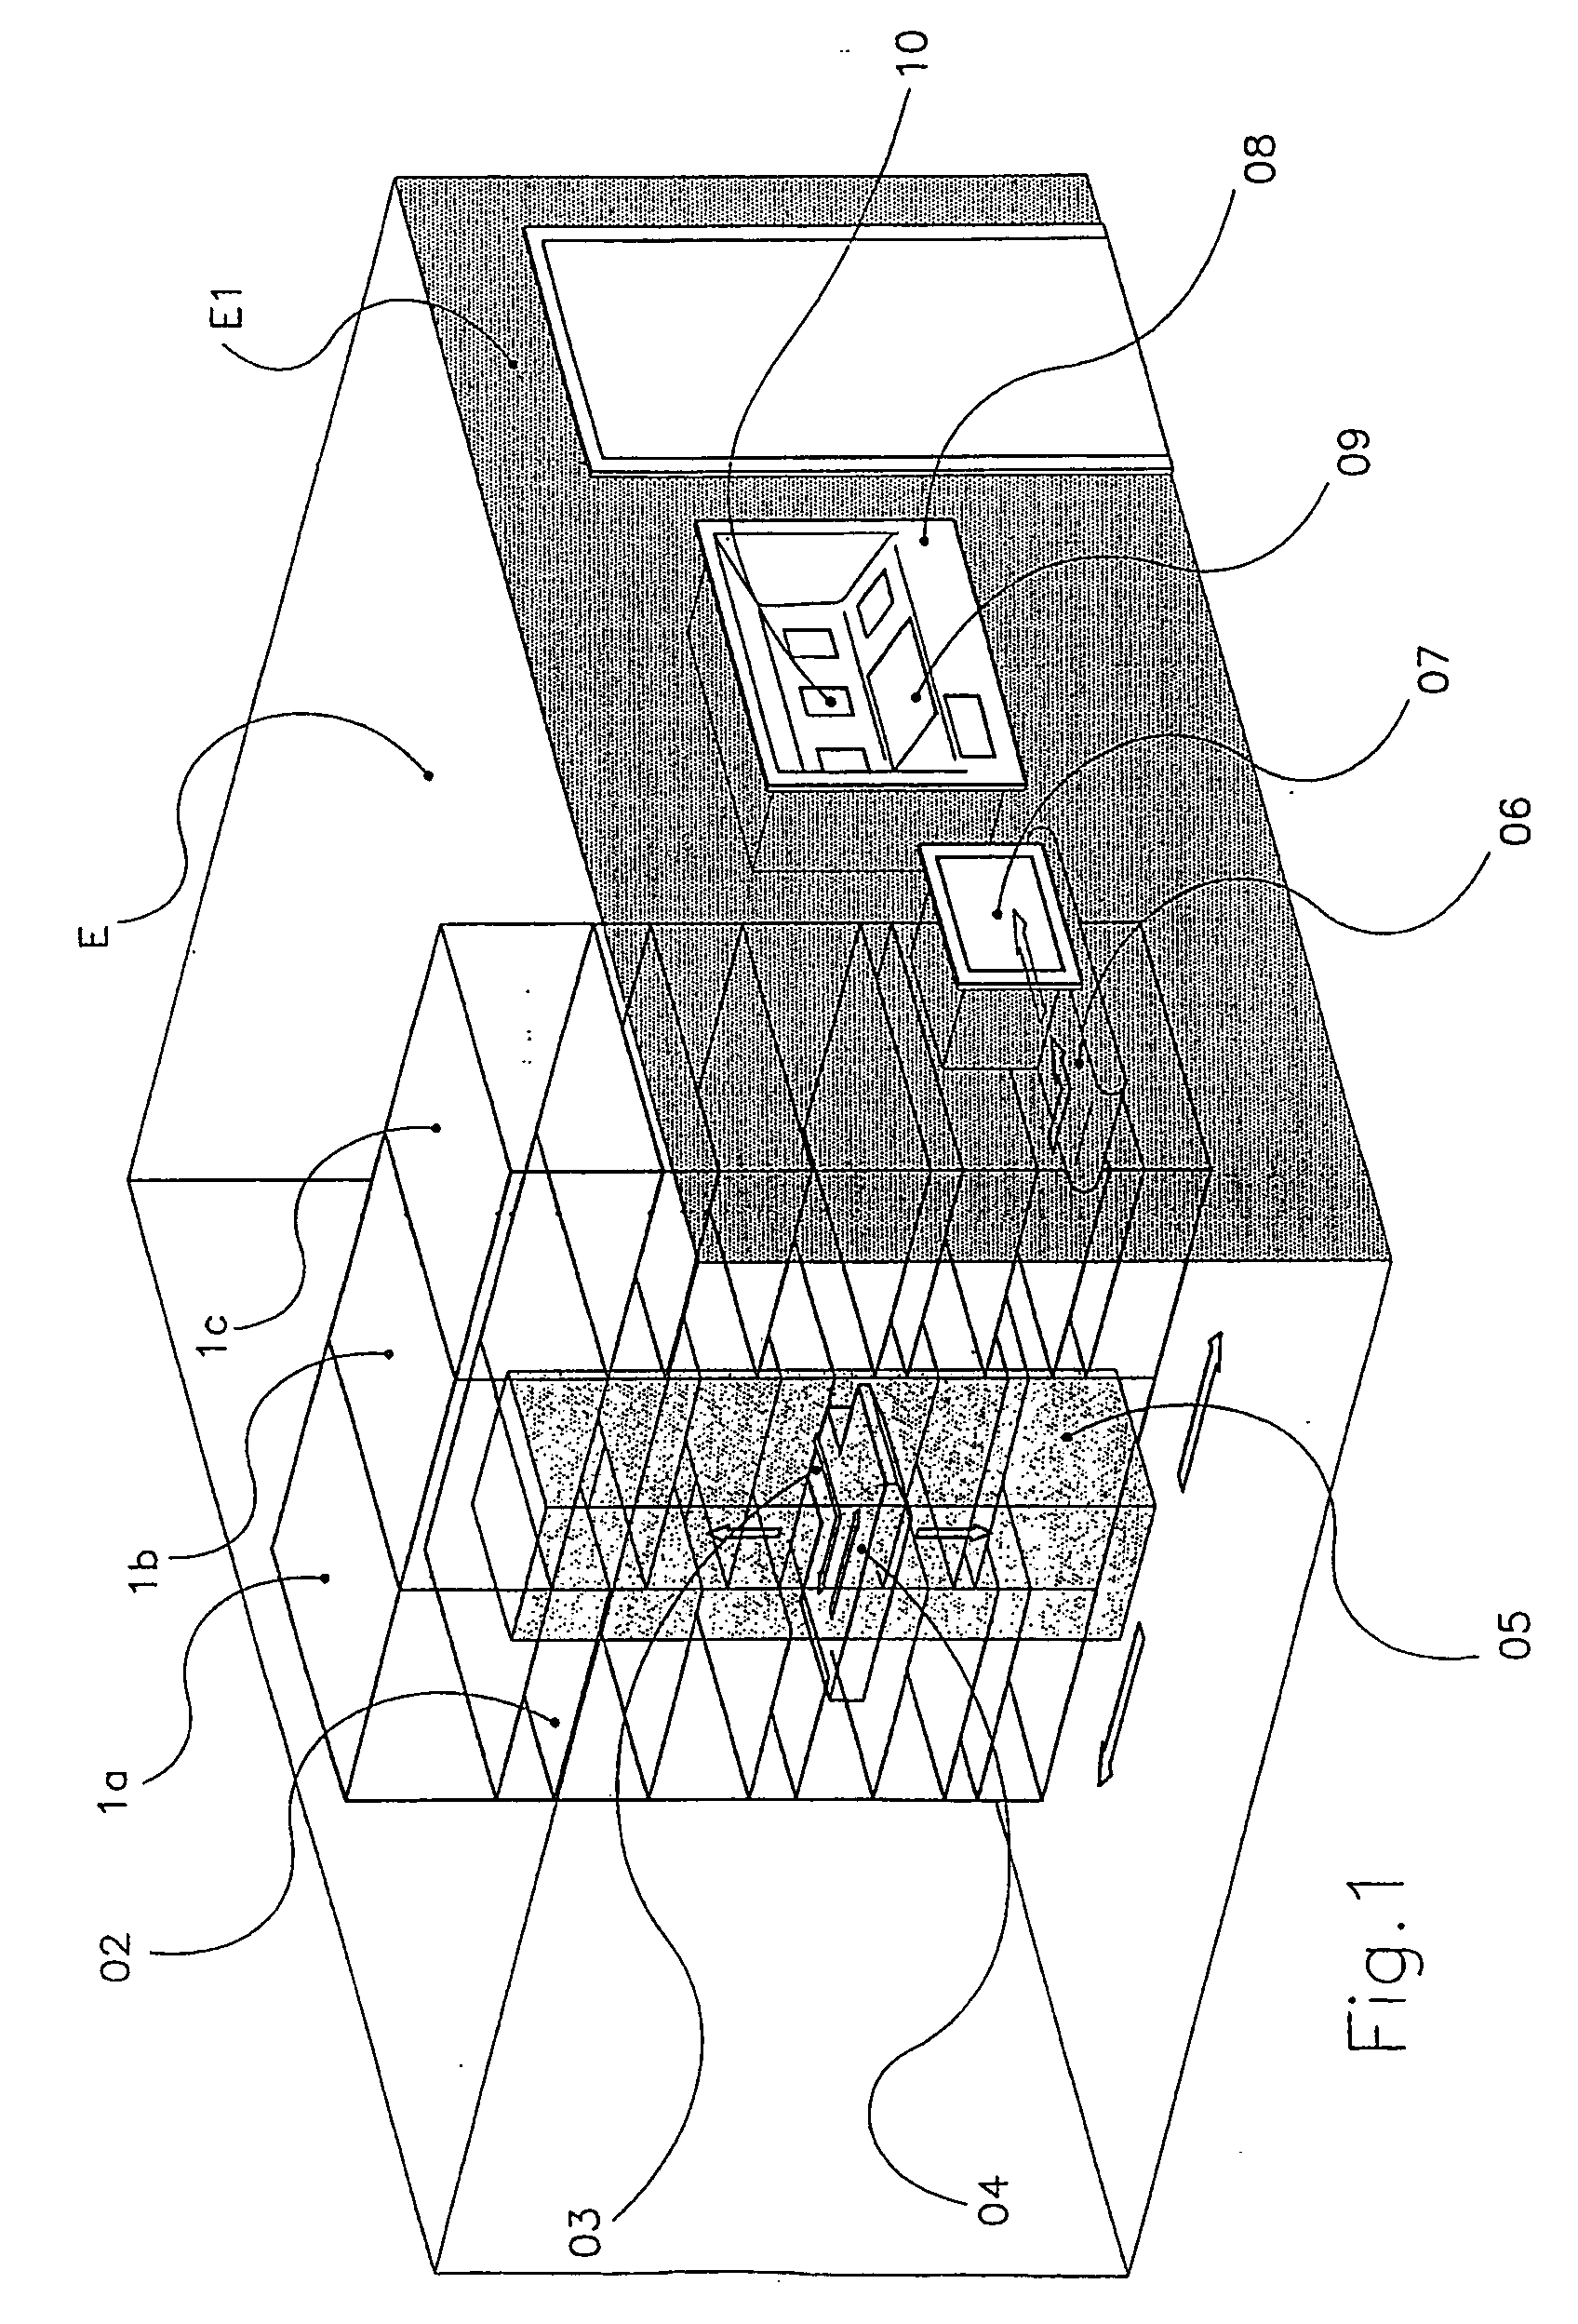 Method and automated system for storing and distributing various objects or articles